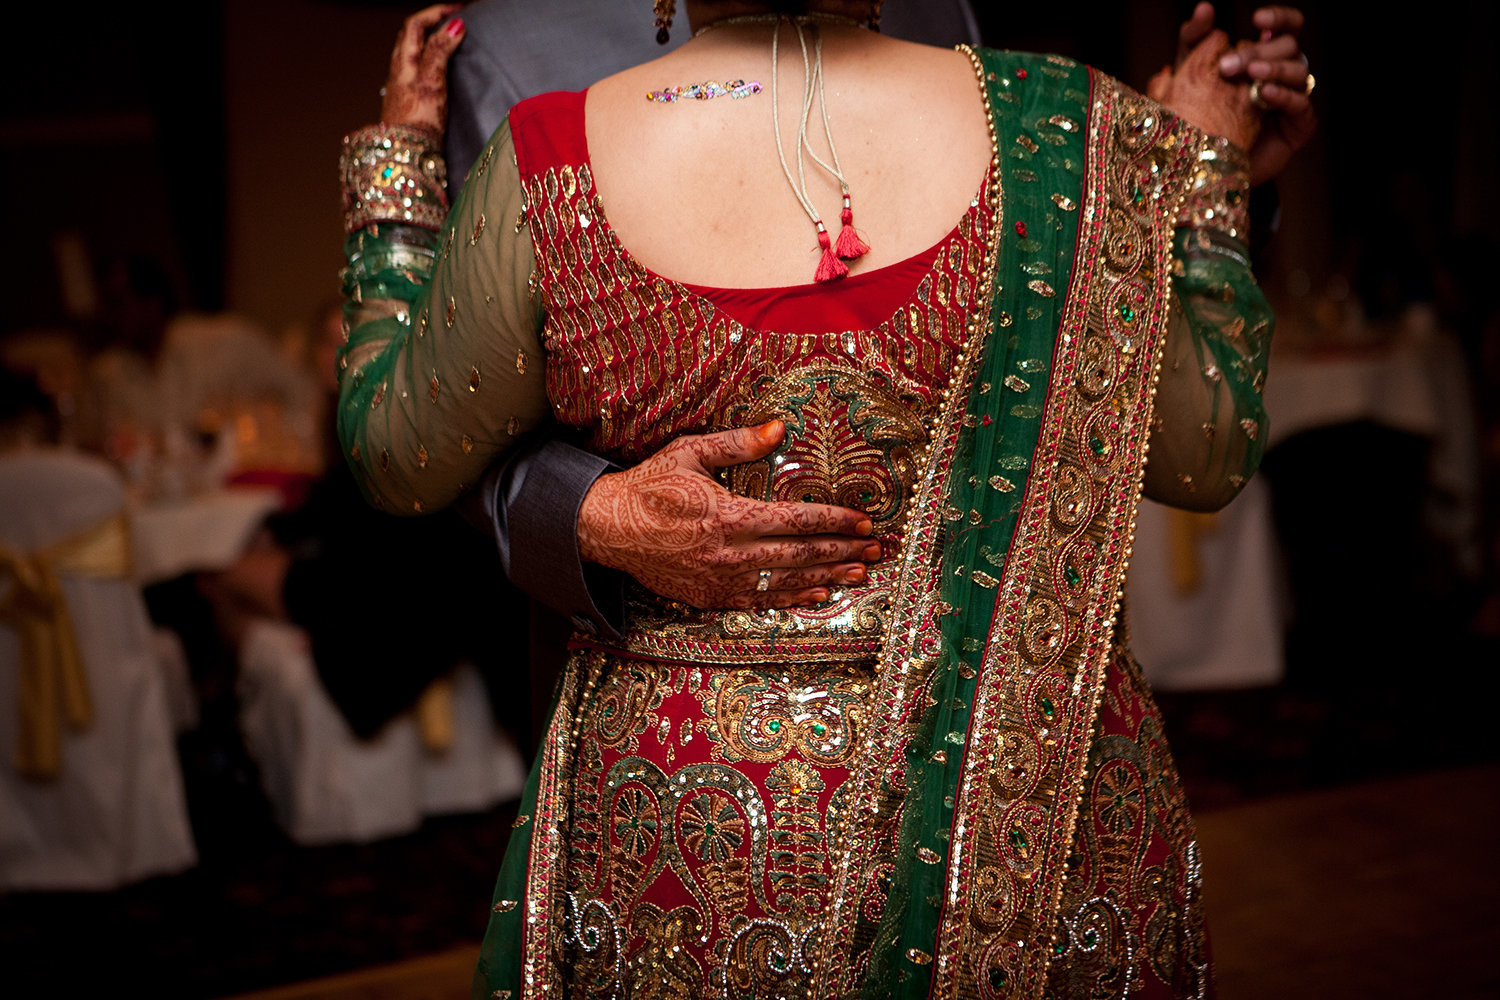 Romantic closeup of bride's sari and grooms hand during their first dance